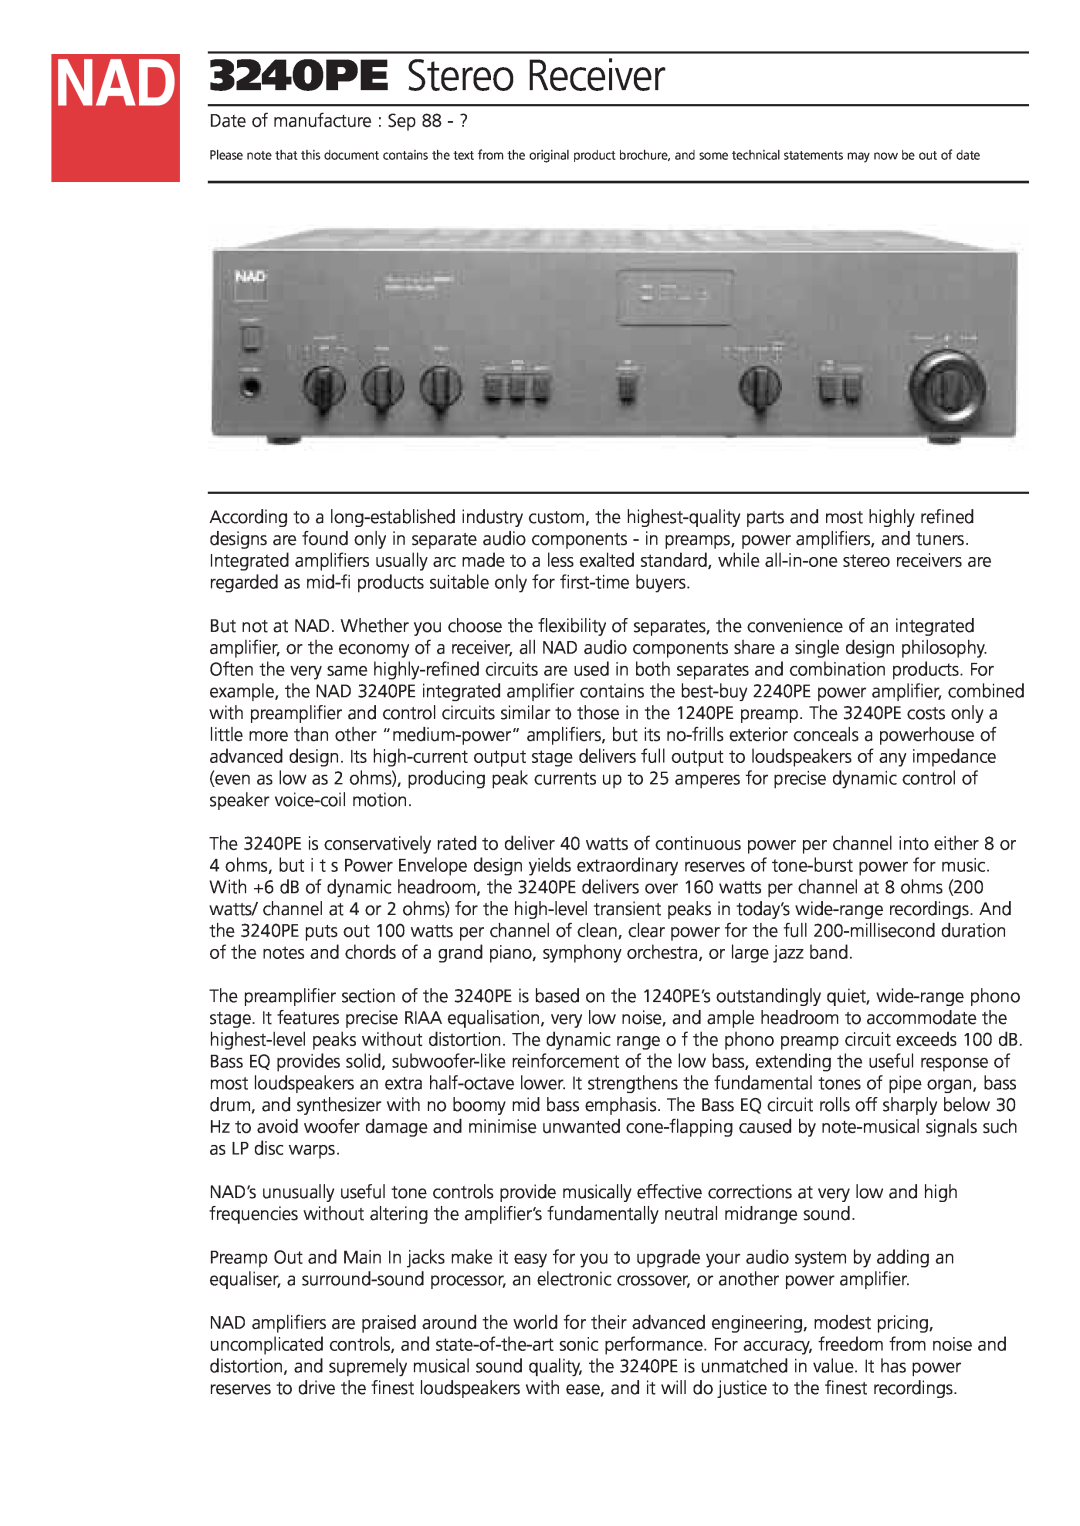 NAD brochure 3240PE Stereo Receiver 